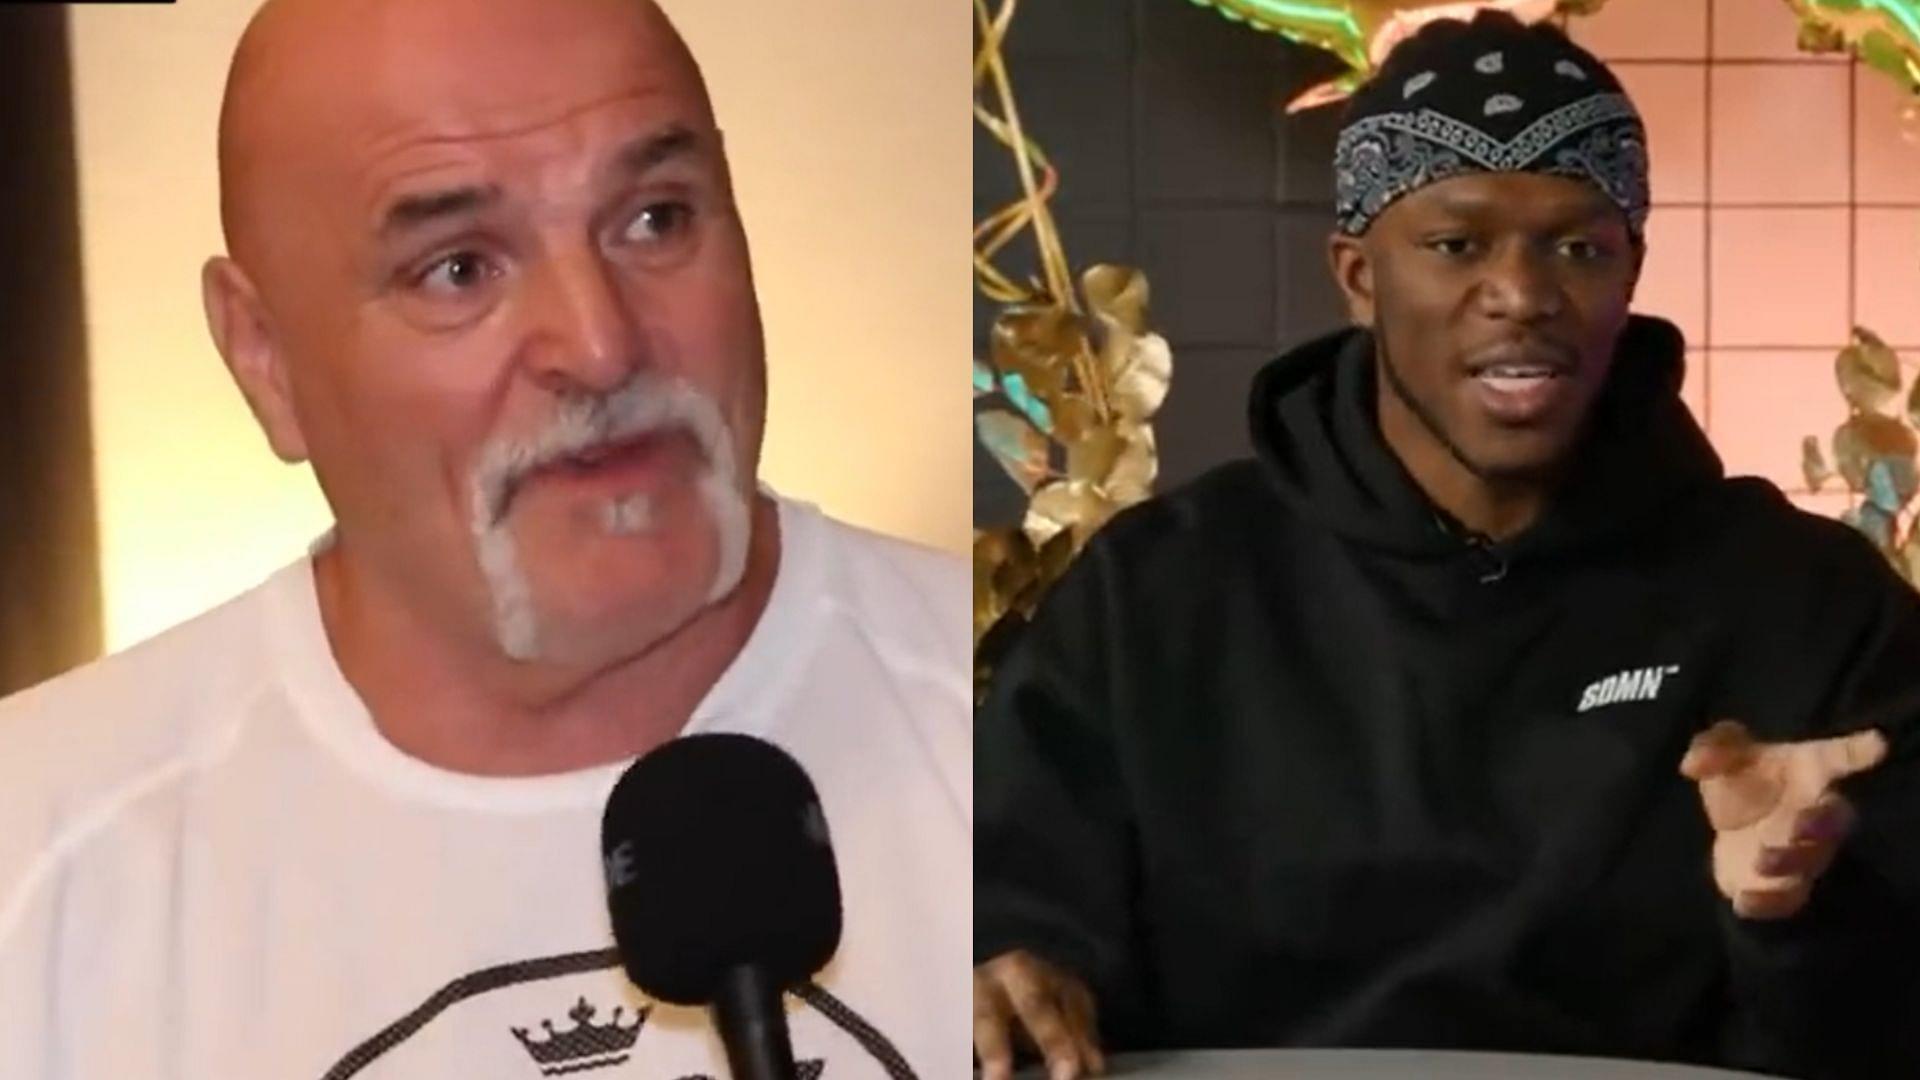 John Fury wants KSI to pay the bet money and threatens to ruin his career otherwise